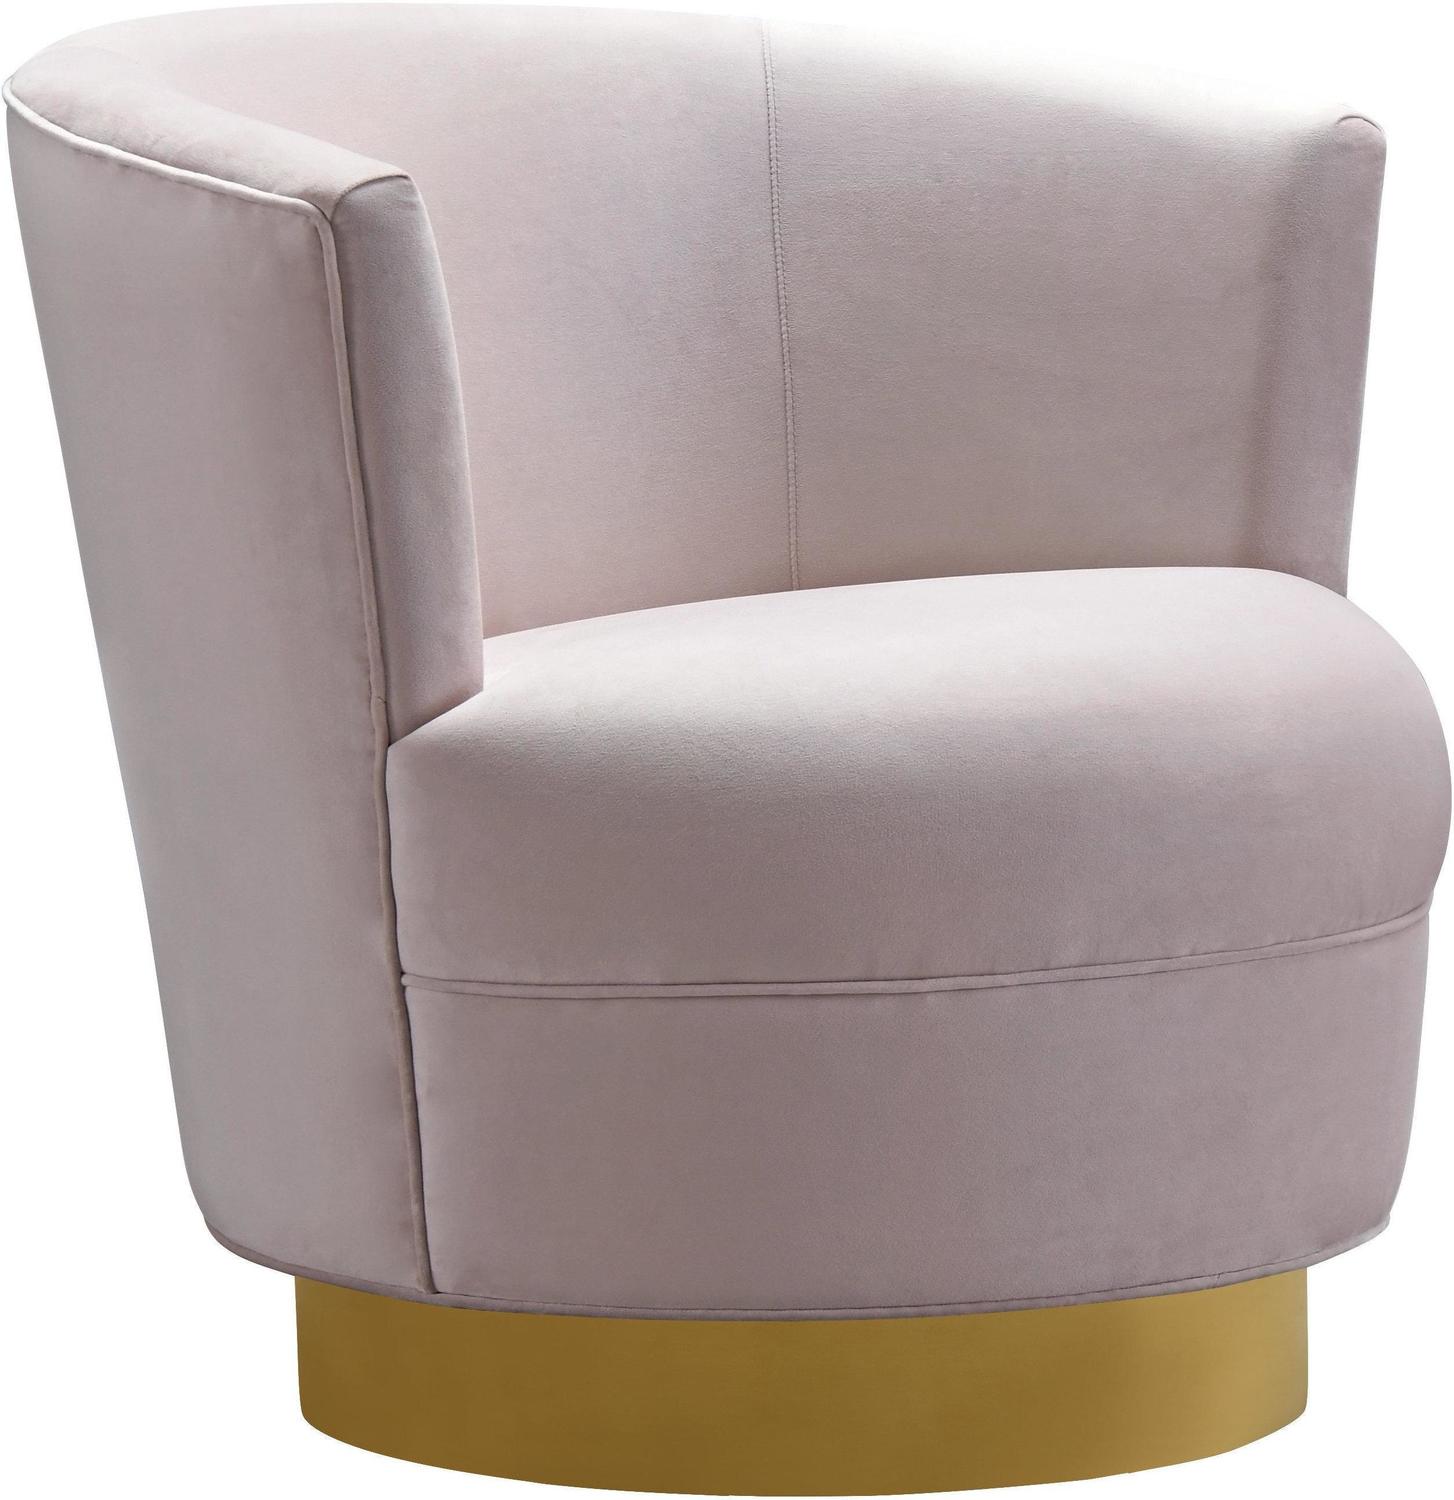 teal slipper chair Contemporary Design Furniture Accent Chairs Blush